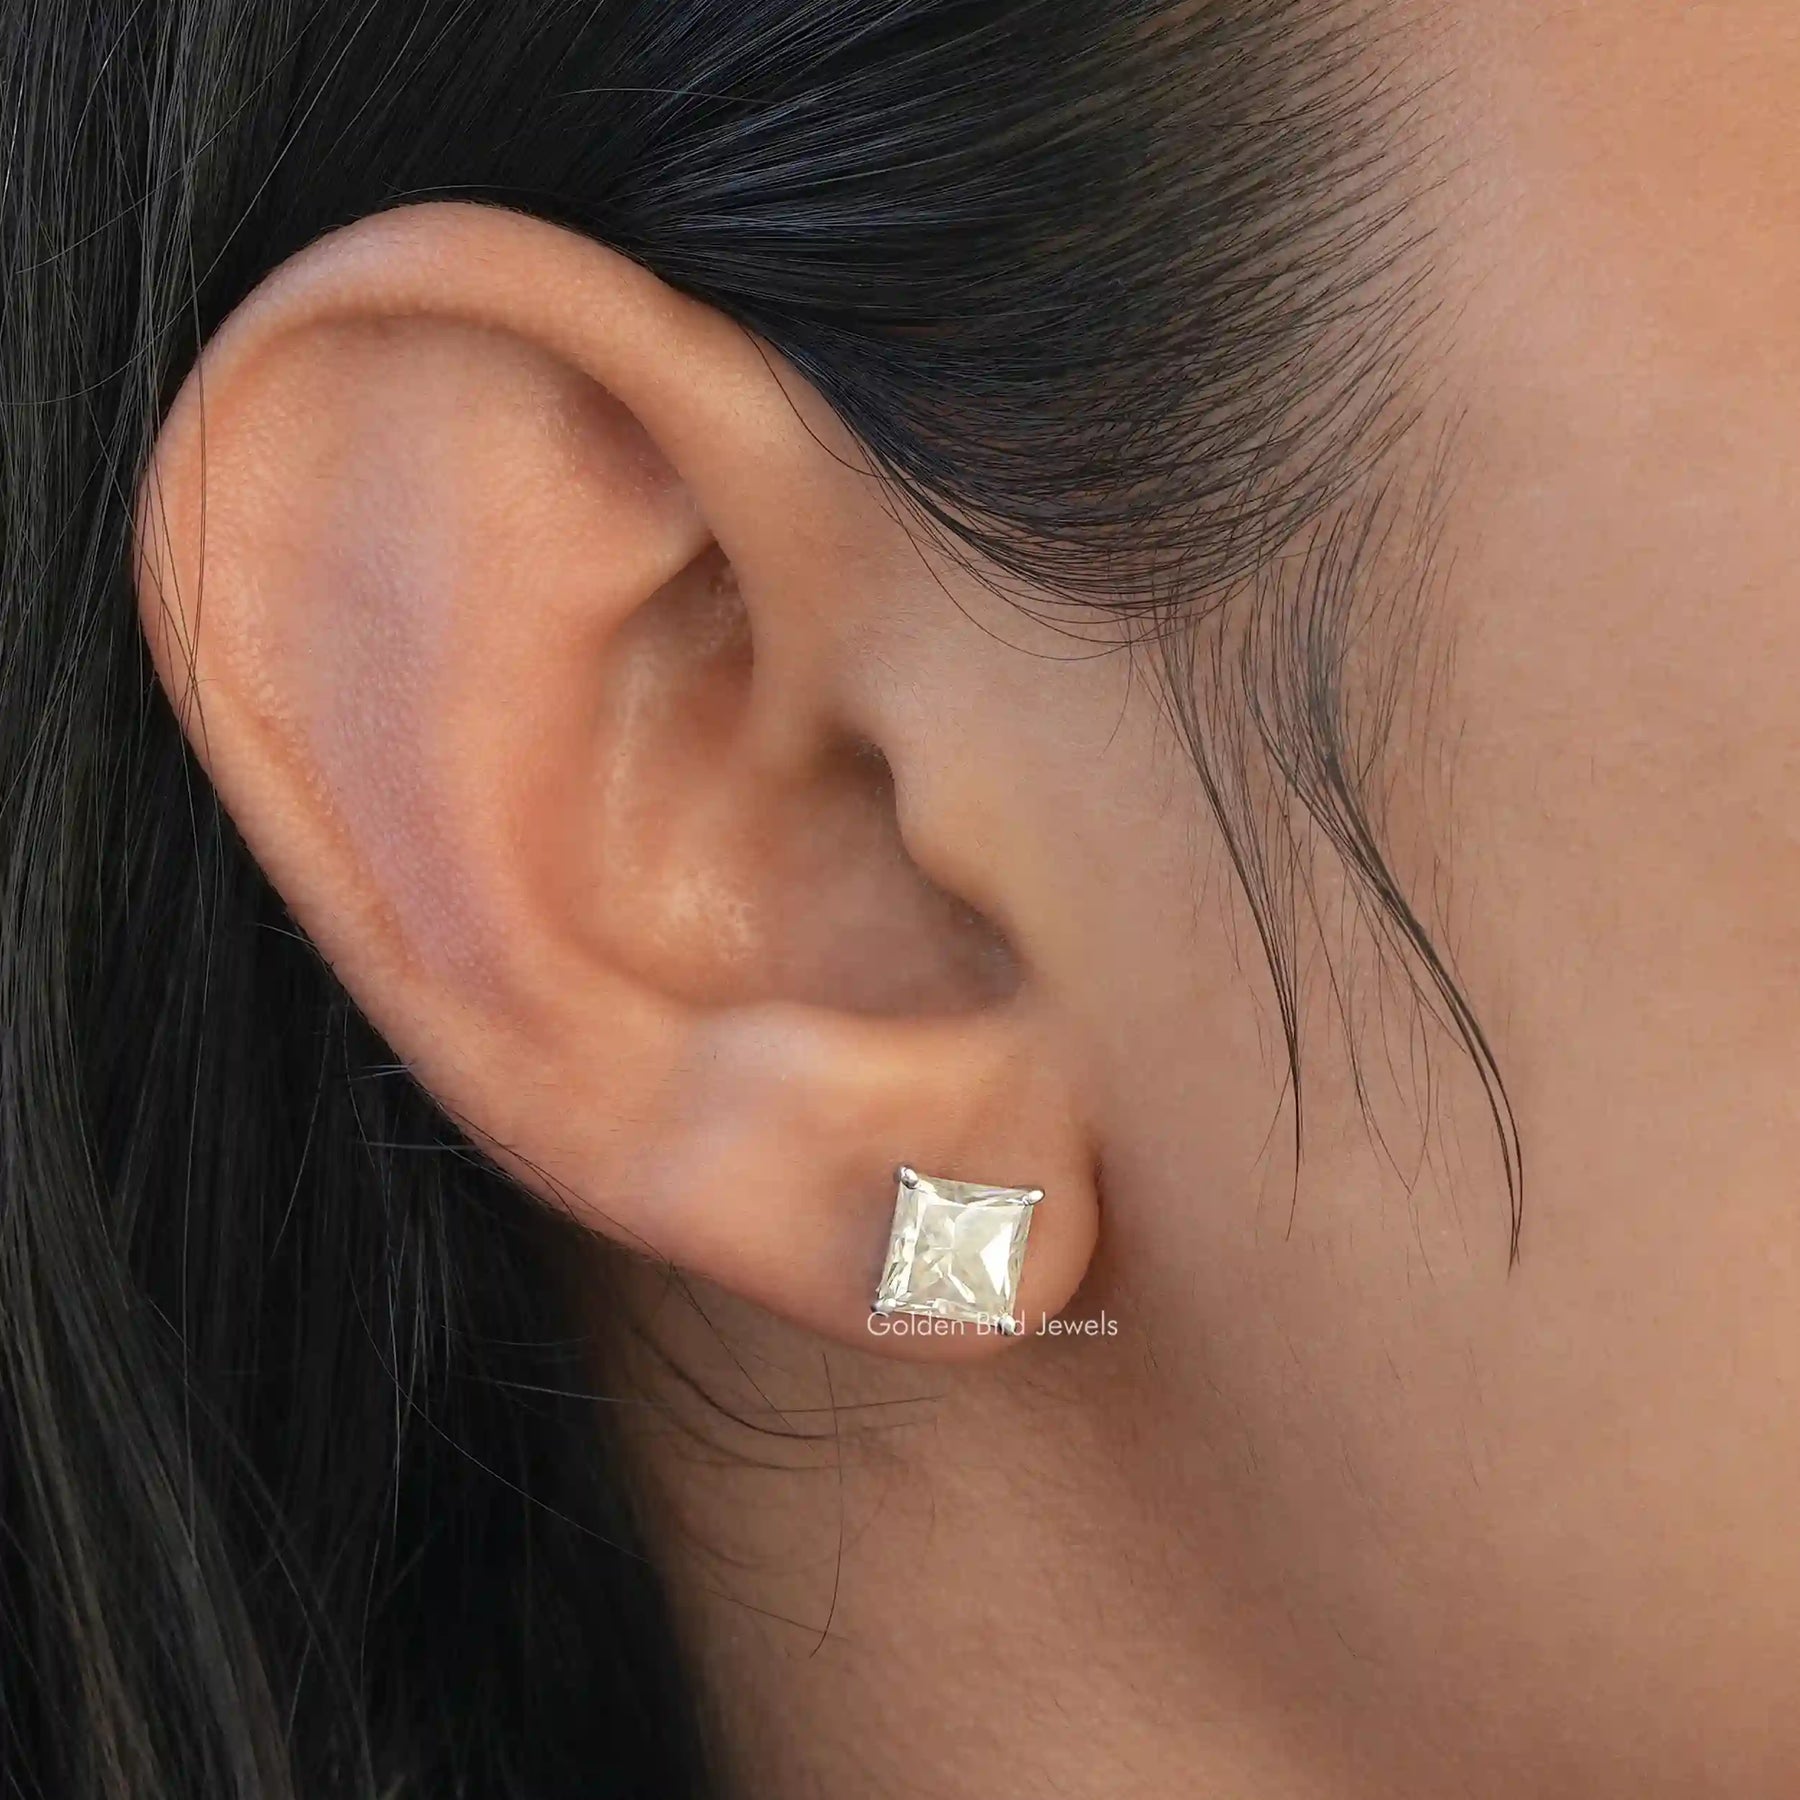 [This princess cut stud earrings crafted with prongs and white gold]-[Golden Bird Jewels]